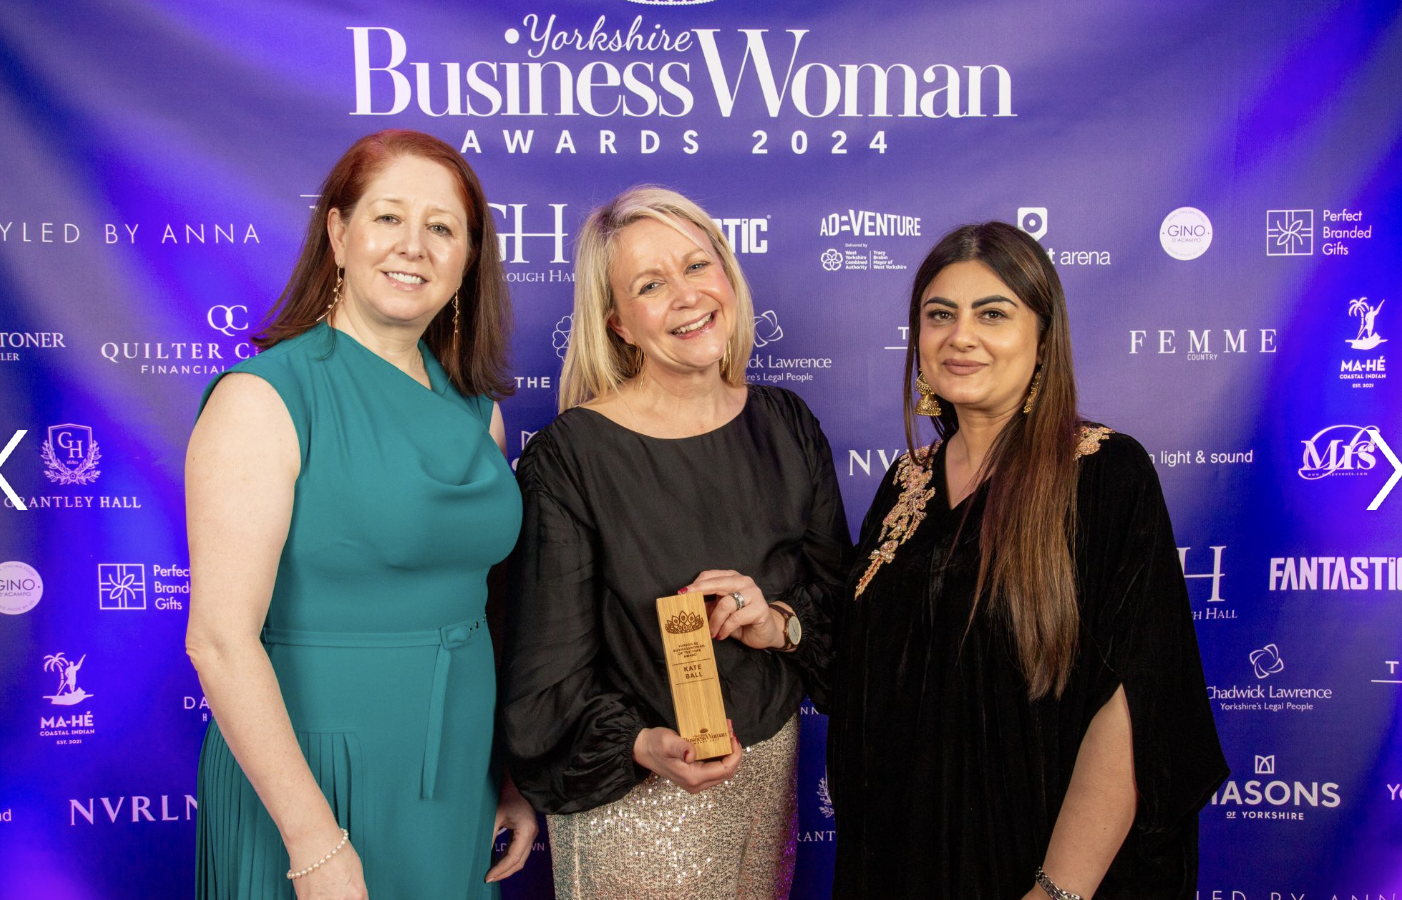 Souvenir images now available from the first Yorkshire Businesswoman Awards 2024